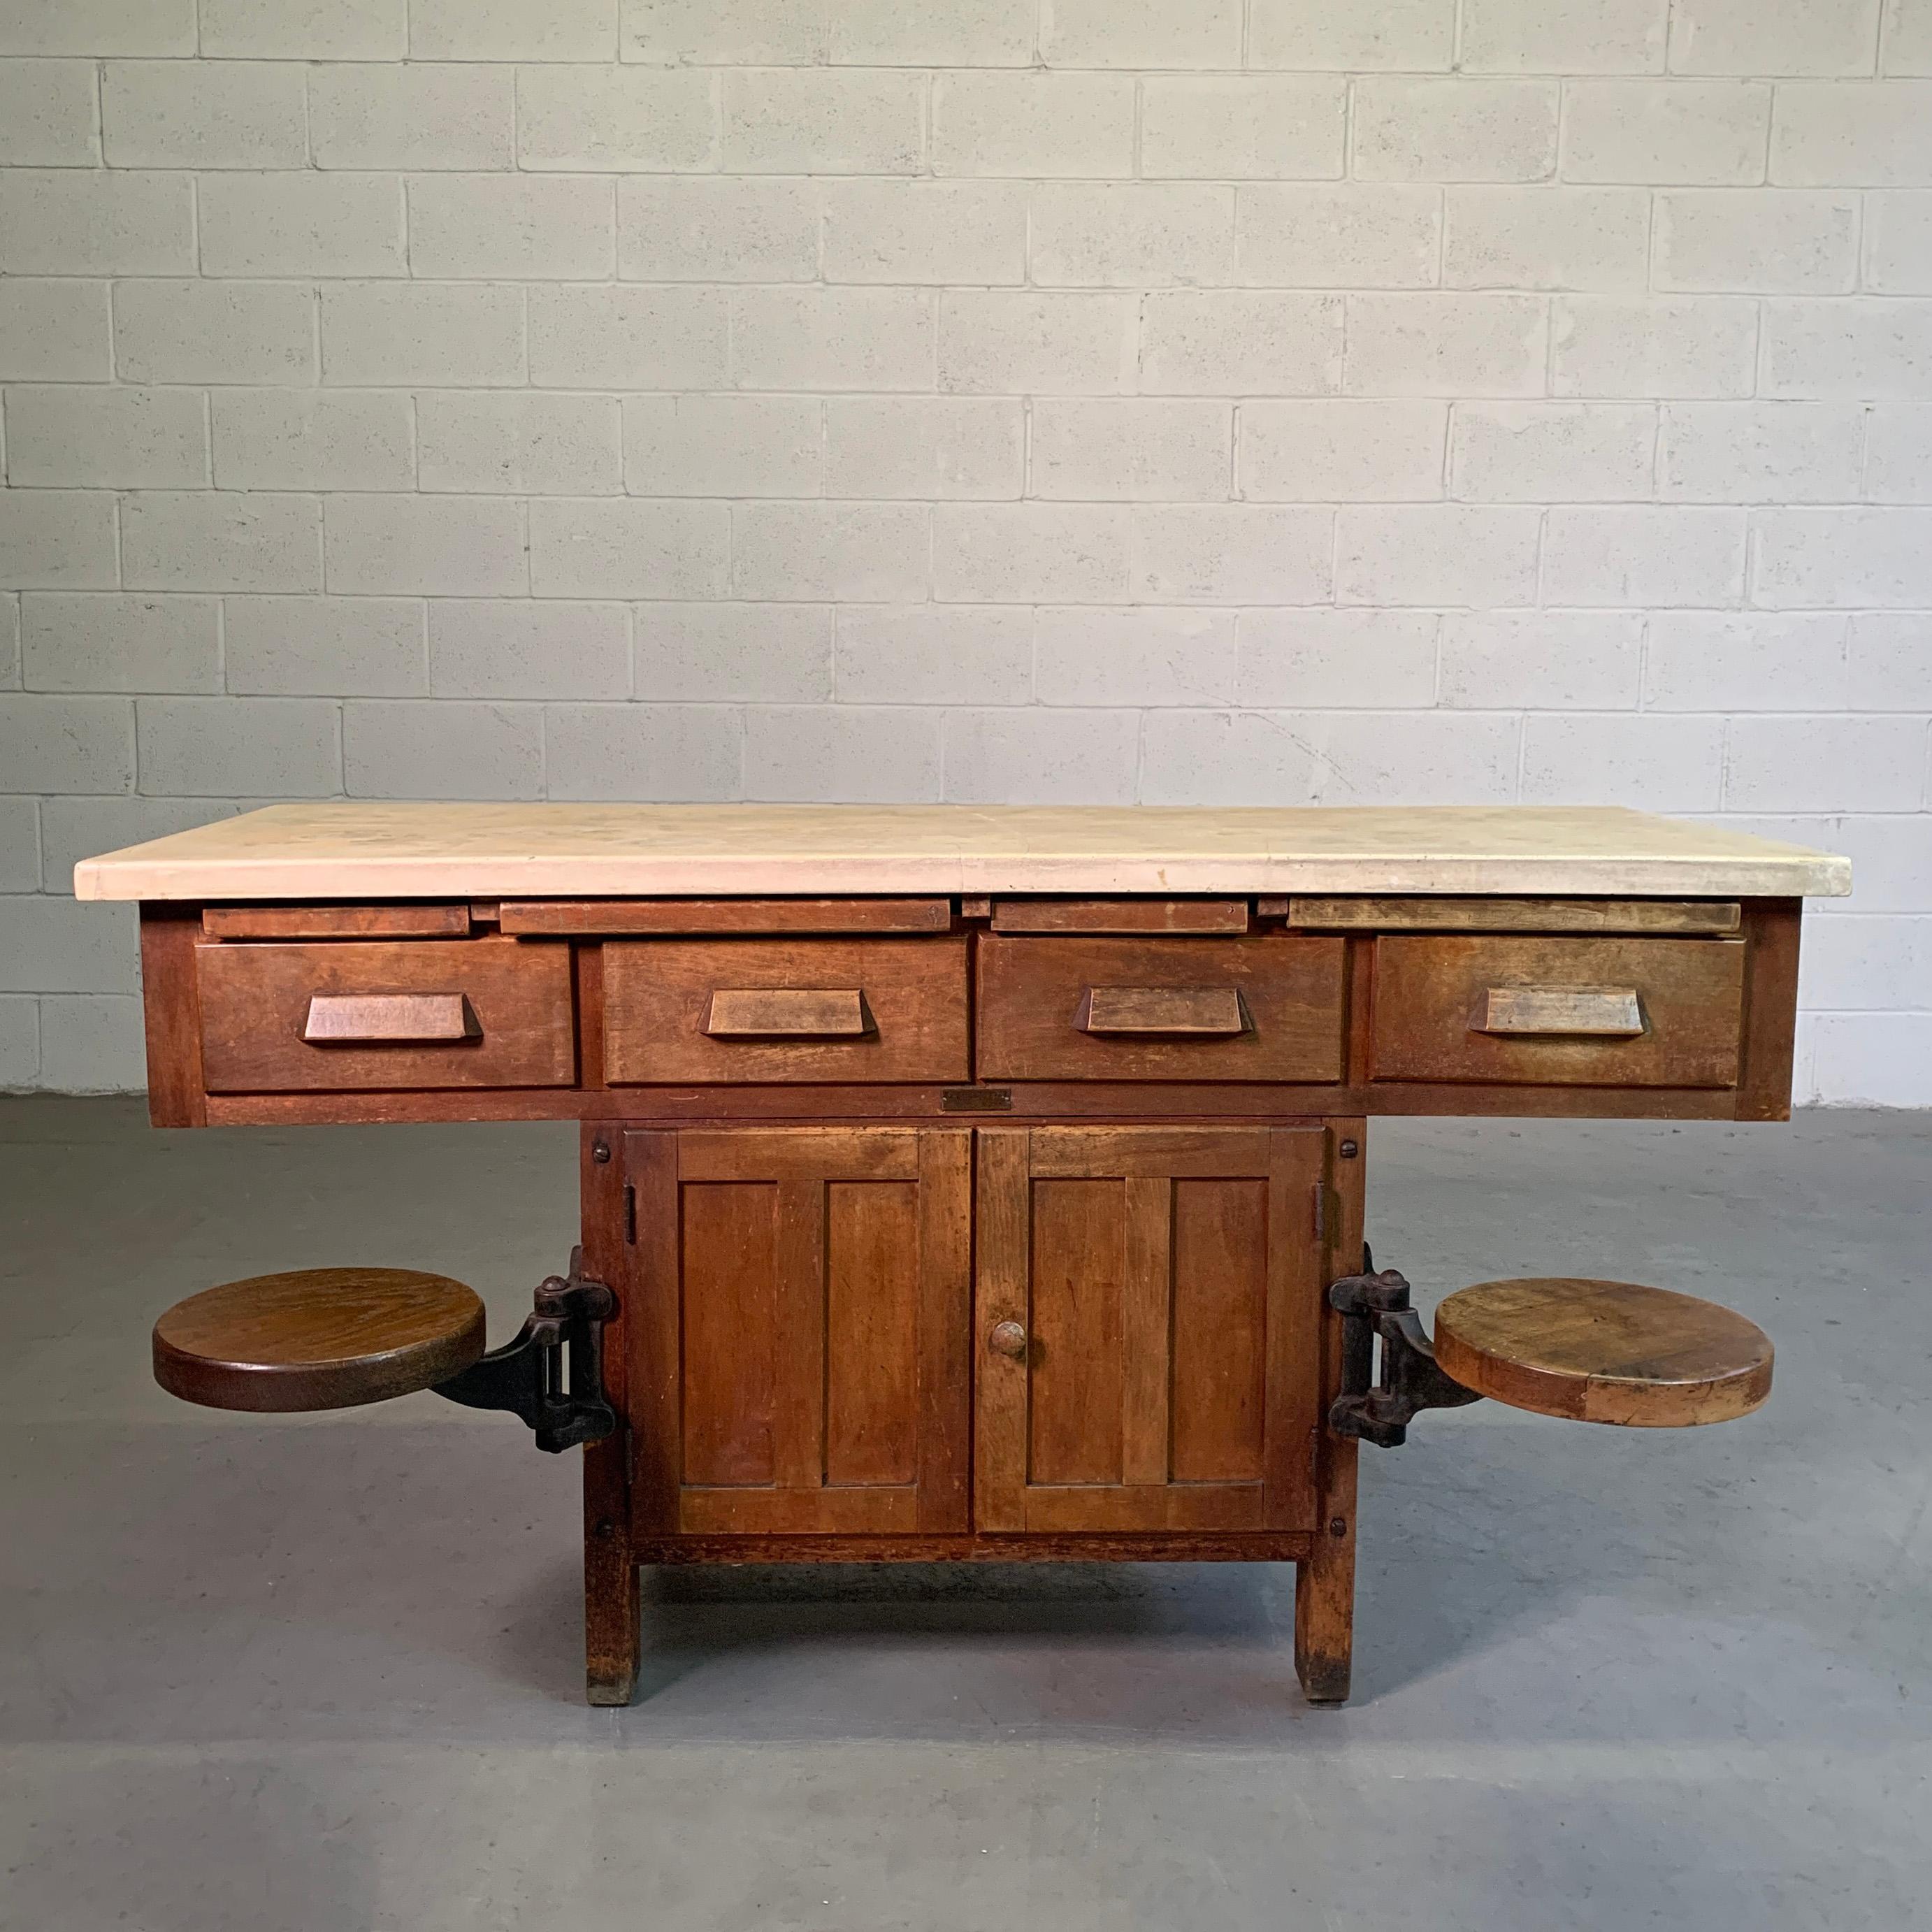 Early 20th century, Industrial, chemistry, laboratory workbench with concrete top, maple base and cast iron hardware features 2 swing-out seats, cabinet space, drawers and pull-out ledges. The seats are 10 inches diameter x 17.5 inches height with